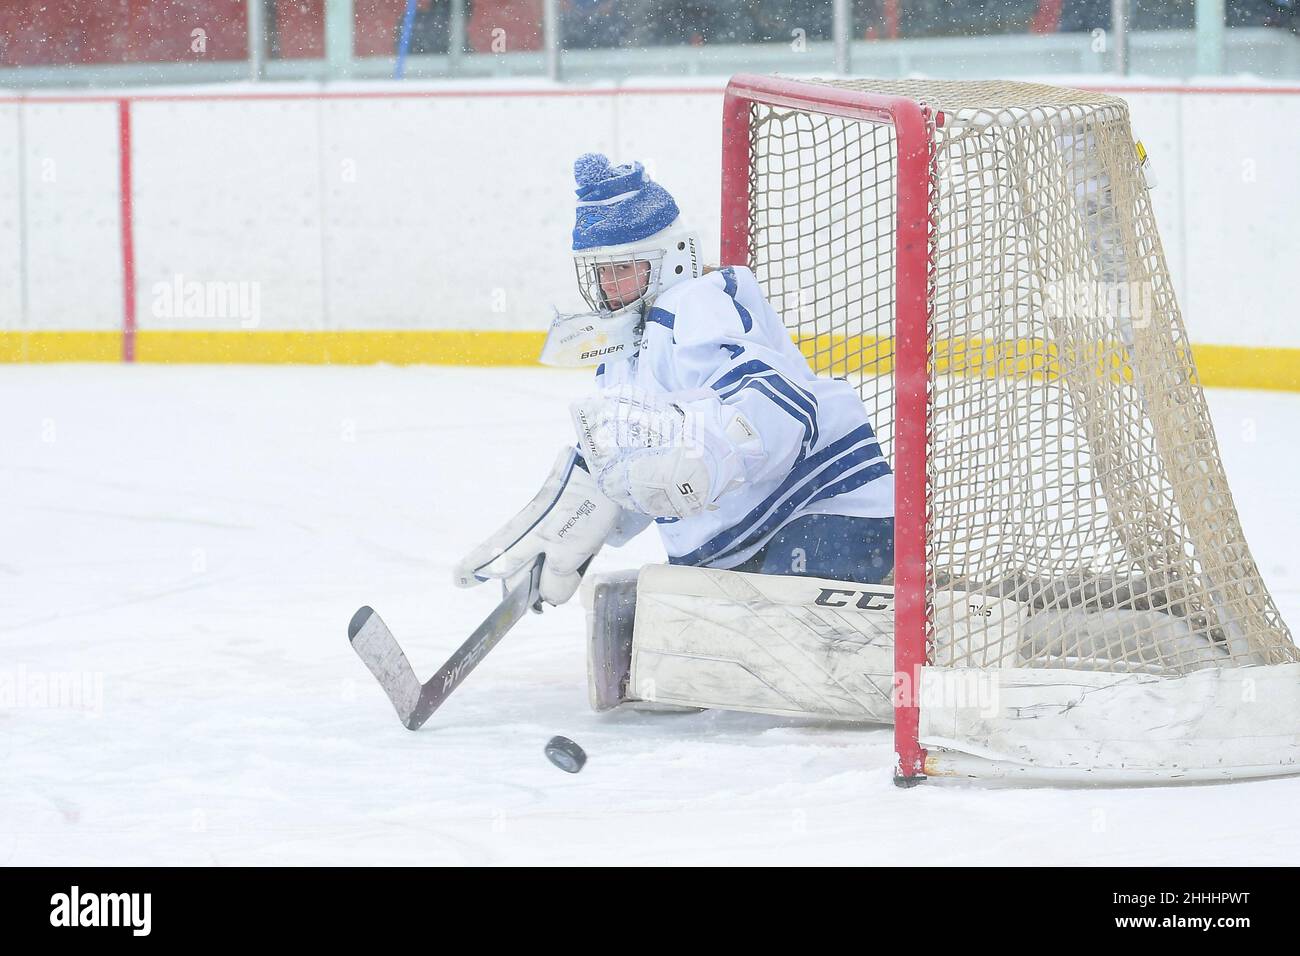 Jamestown Blue Jay goalie Olivia Sorlie (1) keeps and eye on the puck during the 3rd annual Hockey Day North Dakota outdoor hockey event in Jamestown, ND. Youth, high school and college hockey teams from around North Dakota competed over two days. By Russell Hons/CSM Stock Photo